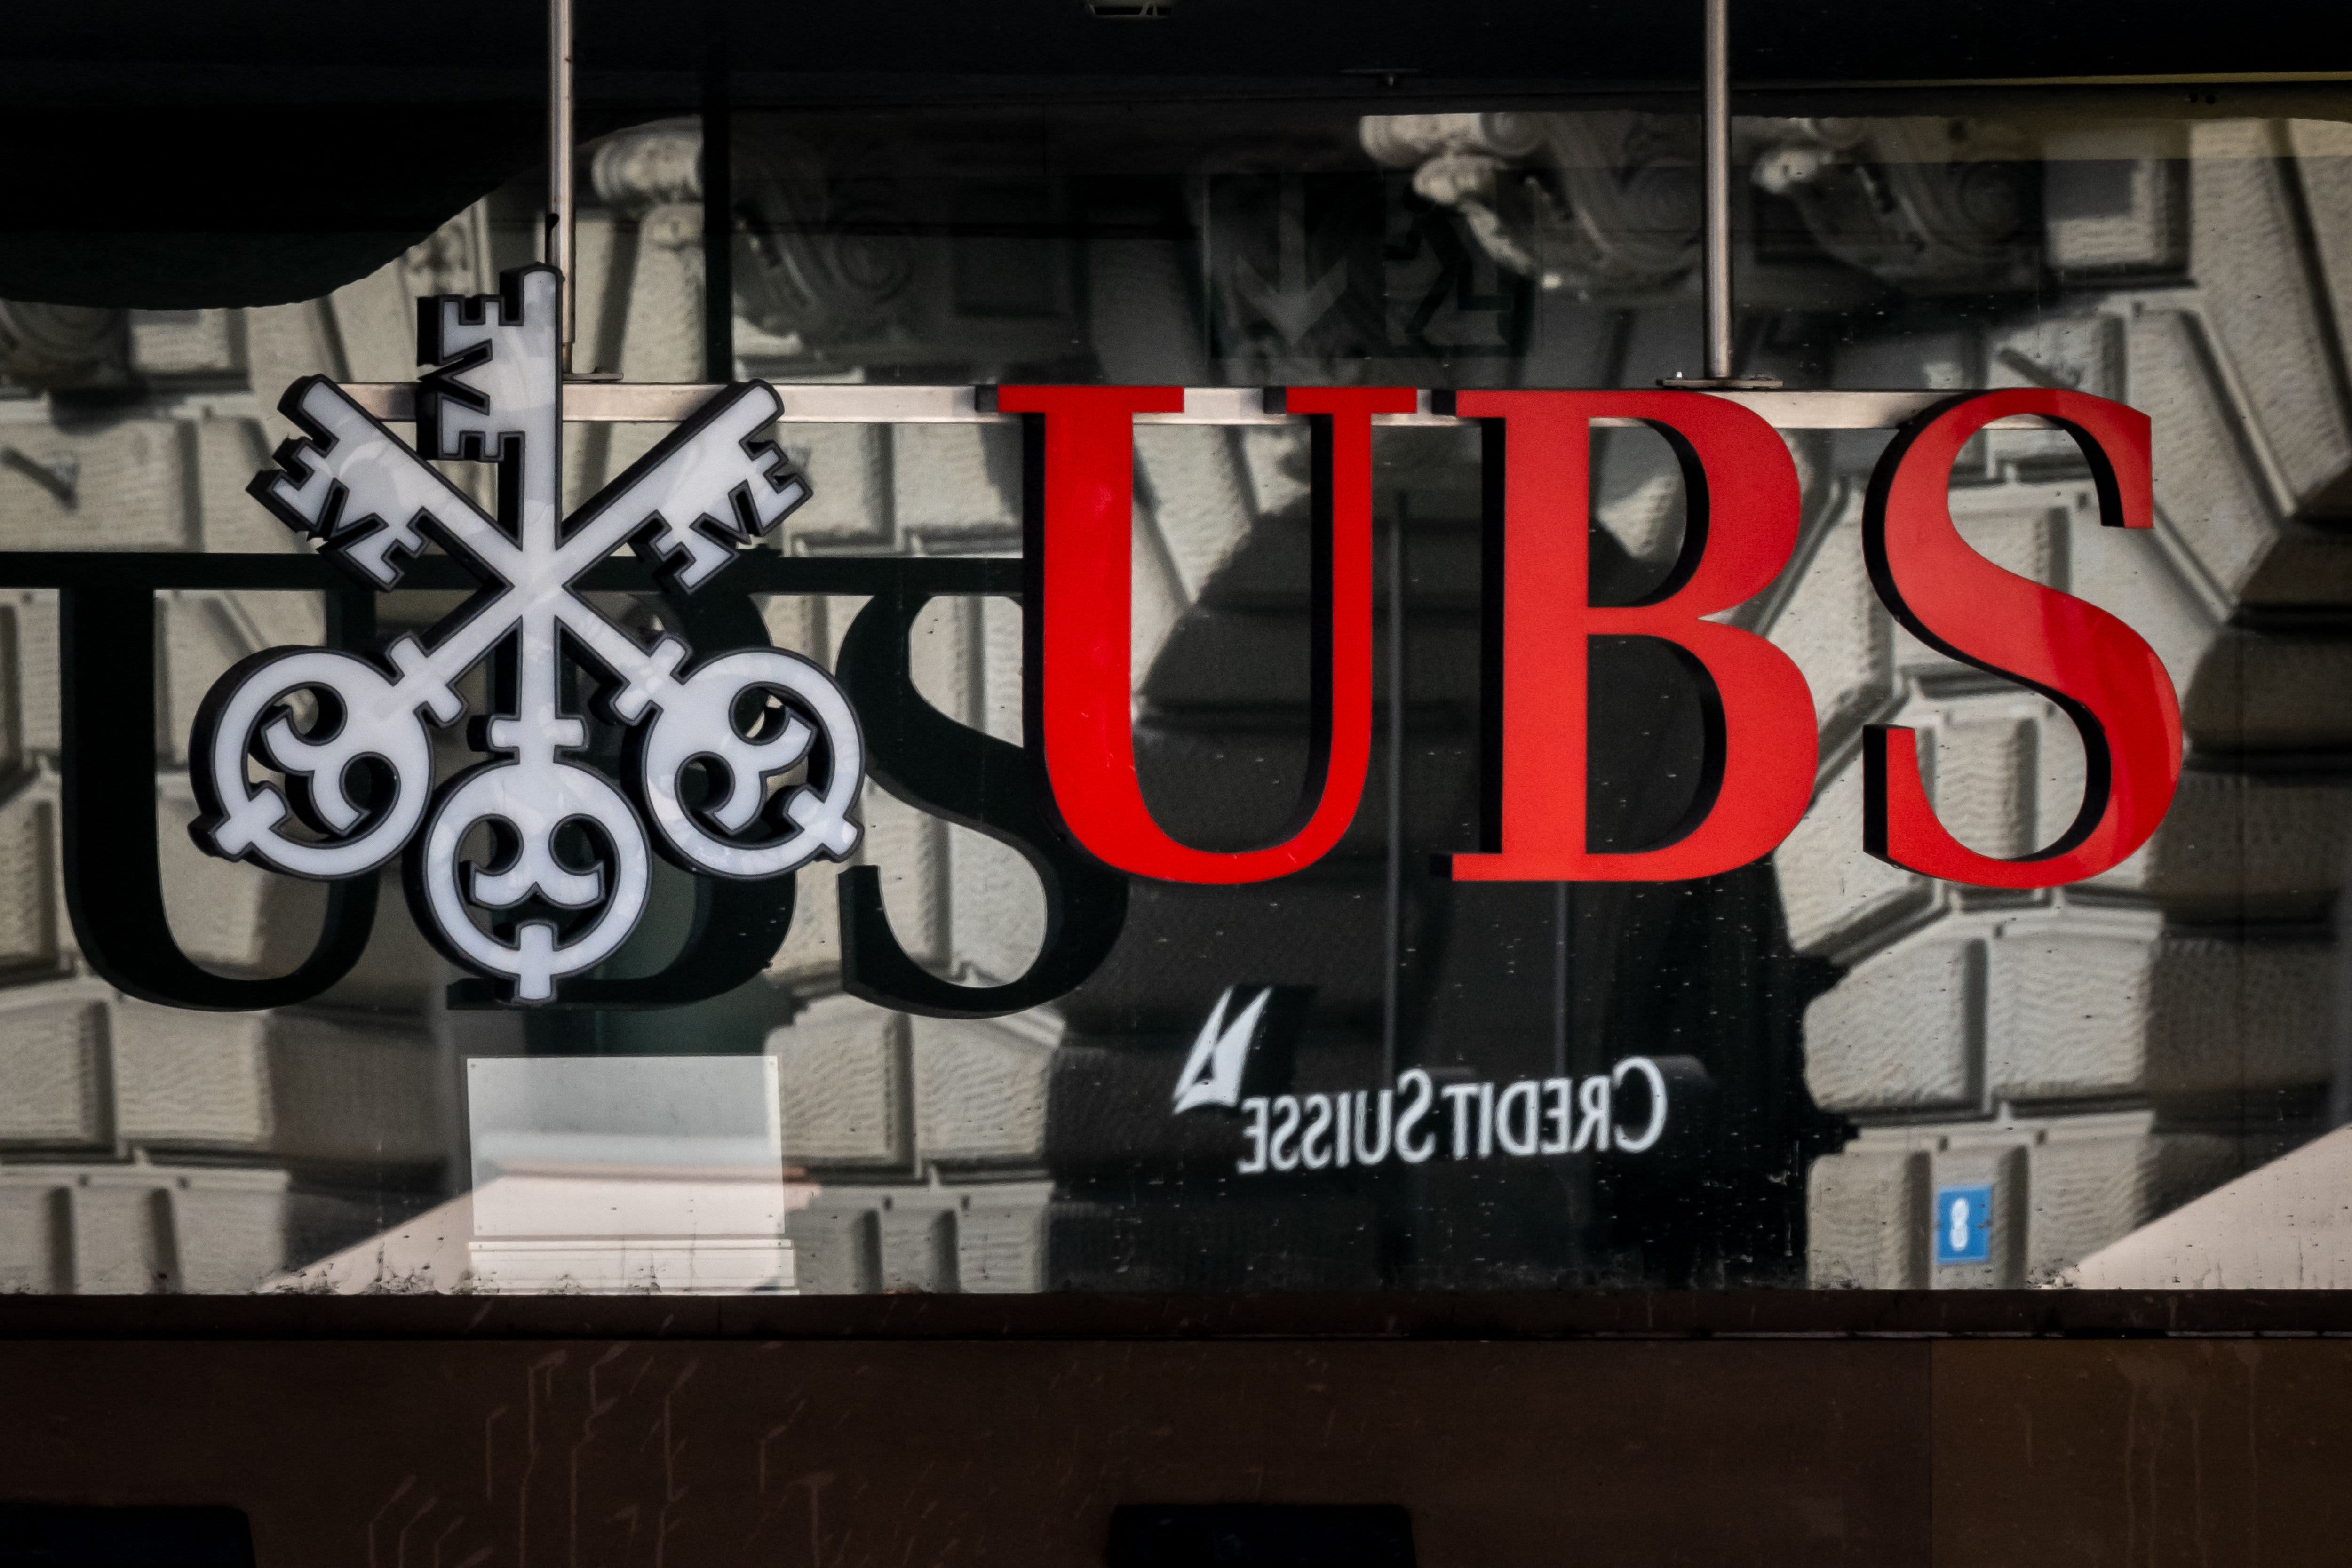 UBS could see big gains after forced Credit Suisse merger. Big U.S. banks may also be winners, analysts say